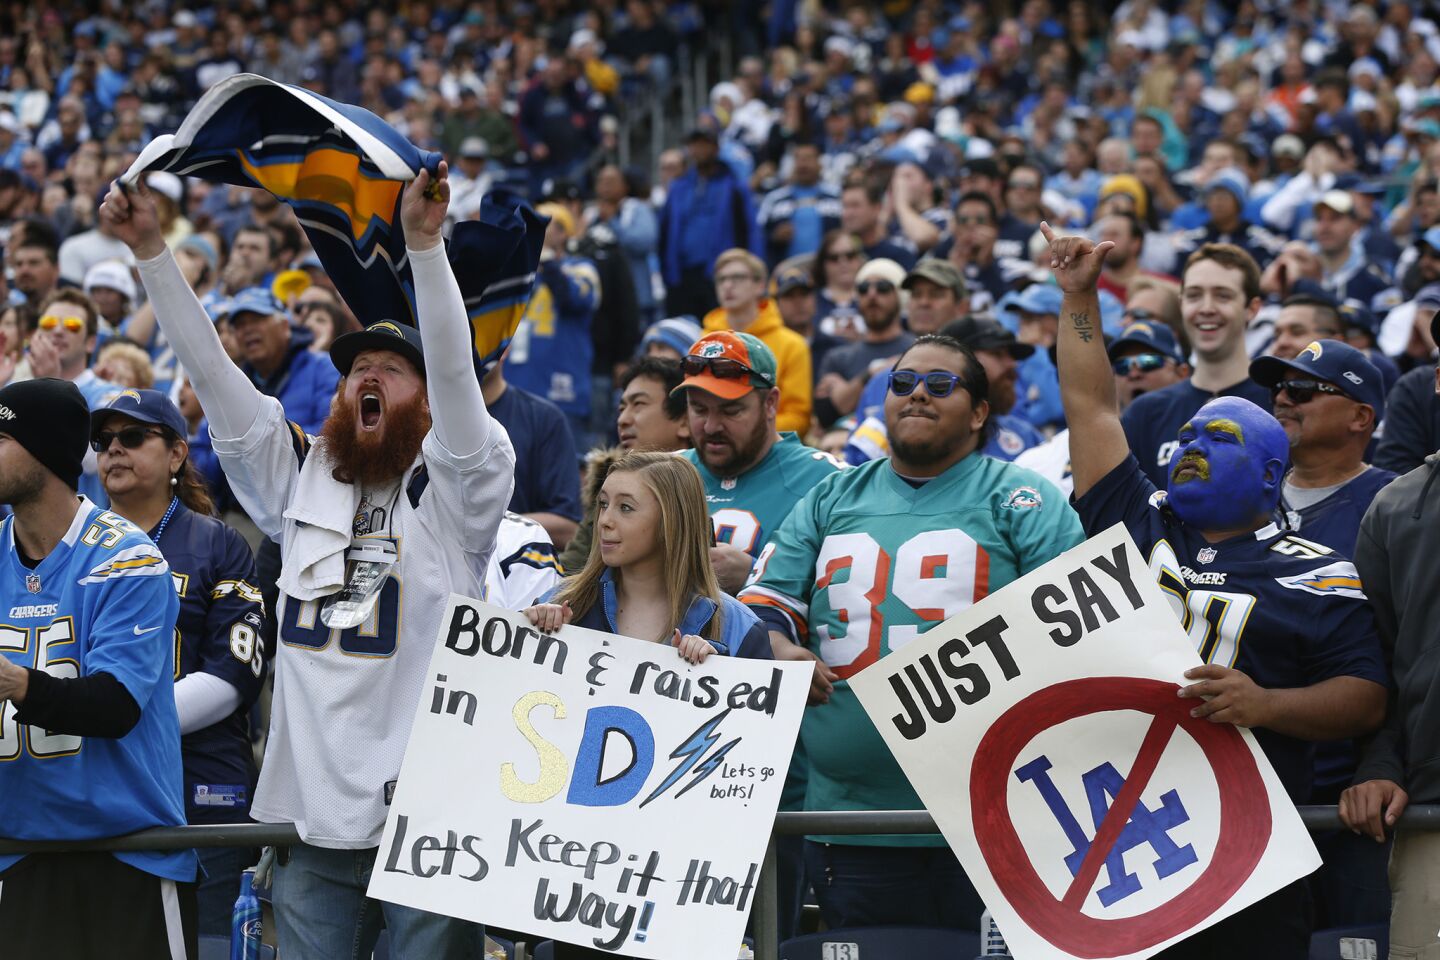 Some Chargers fans have followed the team since childhood and let management know they are against a move to L.A.